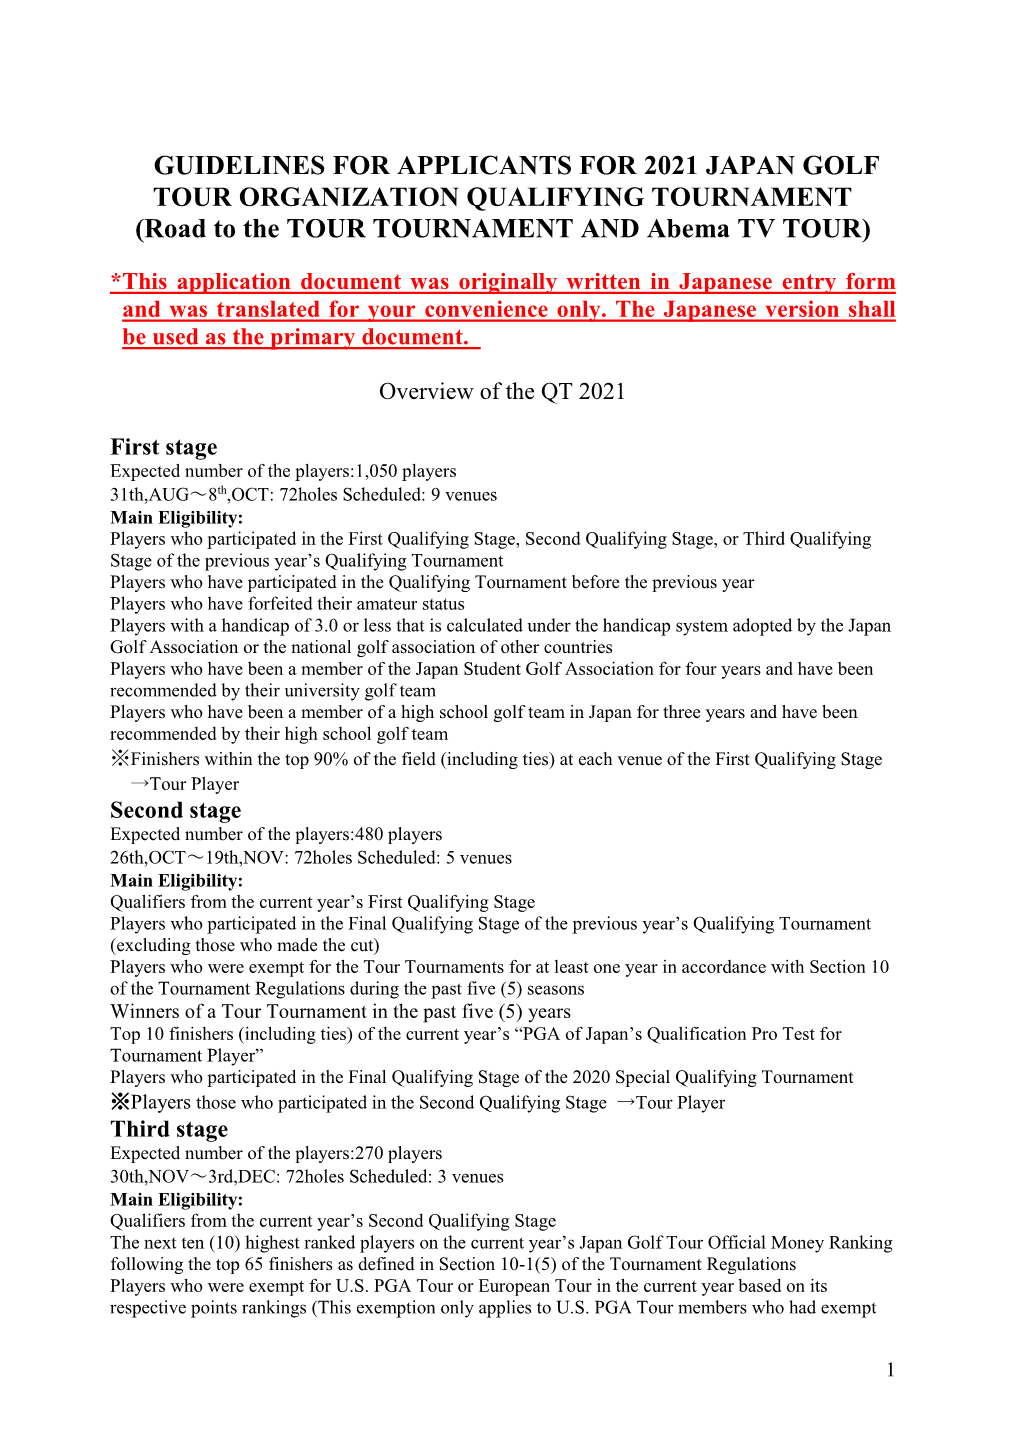 GUIDELINES for APPLICANTS for 2021 JAPAN GOLF TOUR ORGANIZATION QUALIFYING TOURNAMENT (Road to the TOUR TOURNAMENT and Abema TV TOUR)